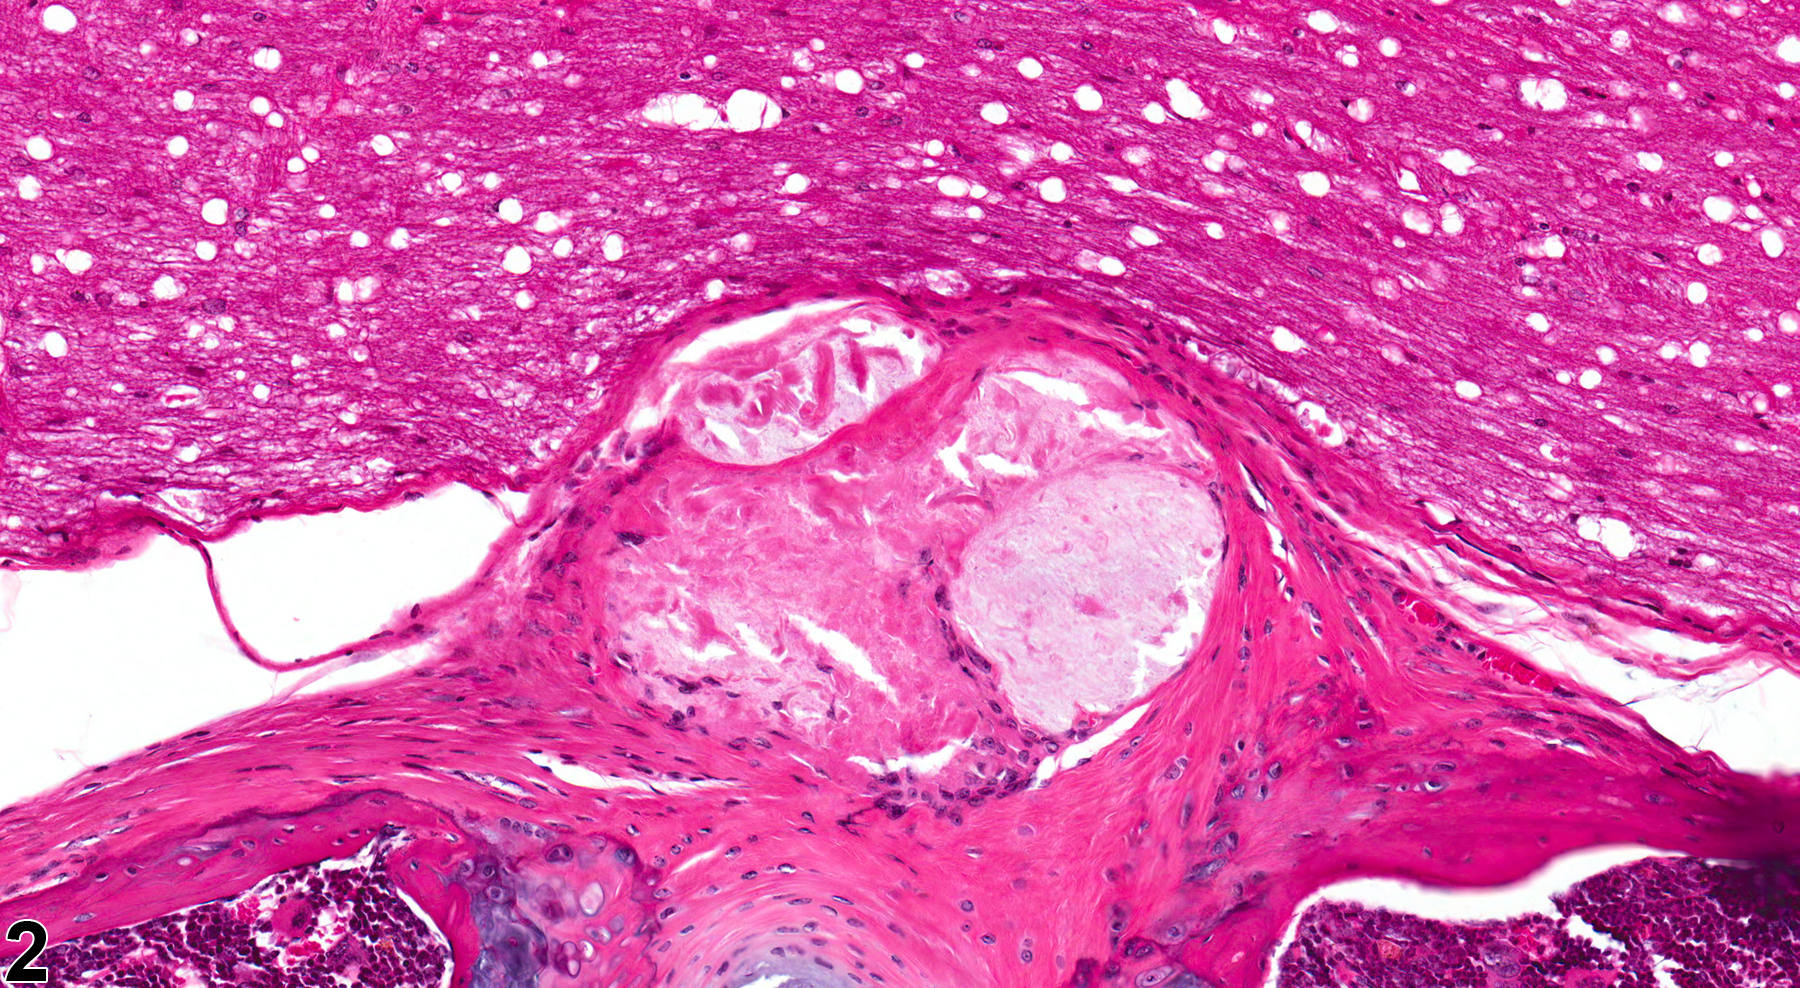 Image of intervertebral disc degeneration in the bone from a male B6C3F1/N mouse in a chronic study